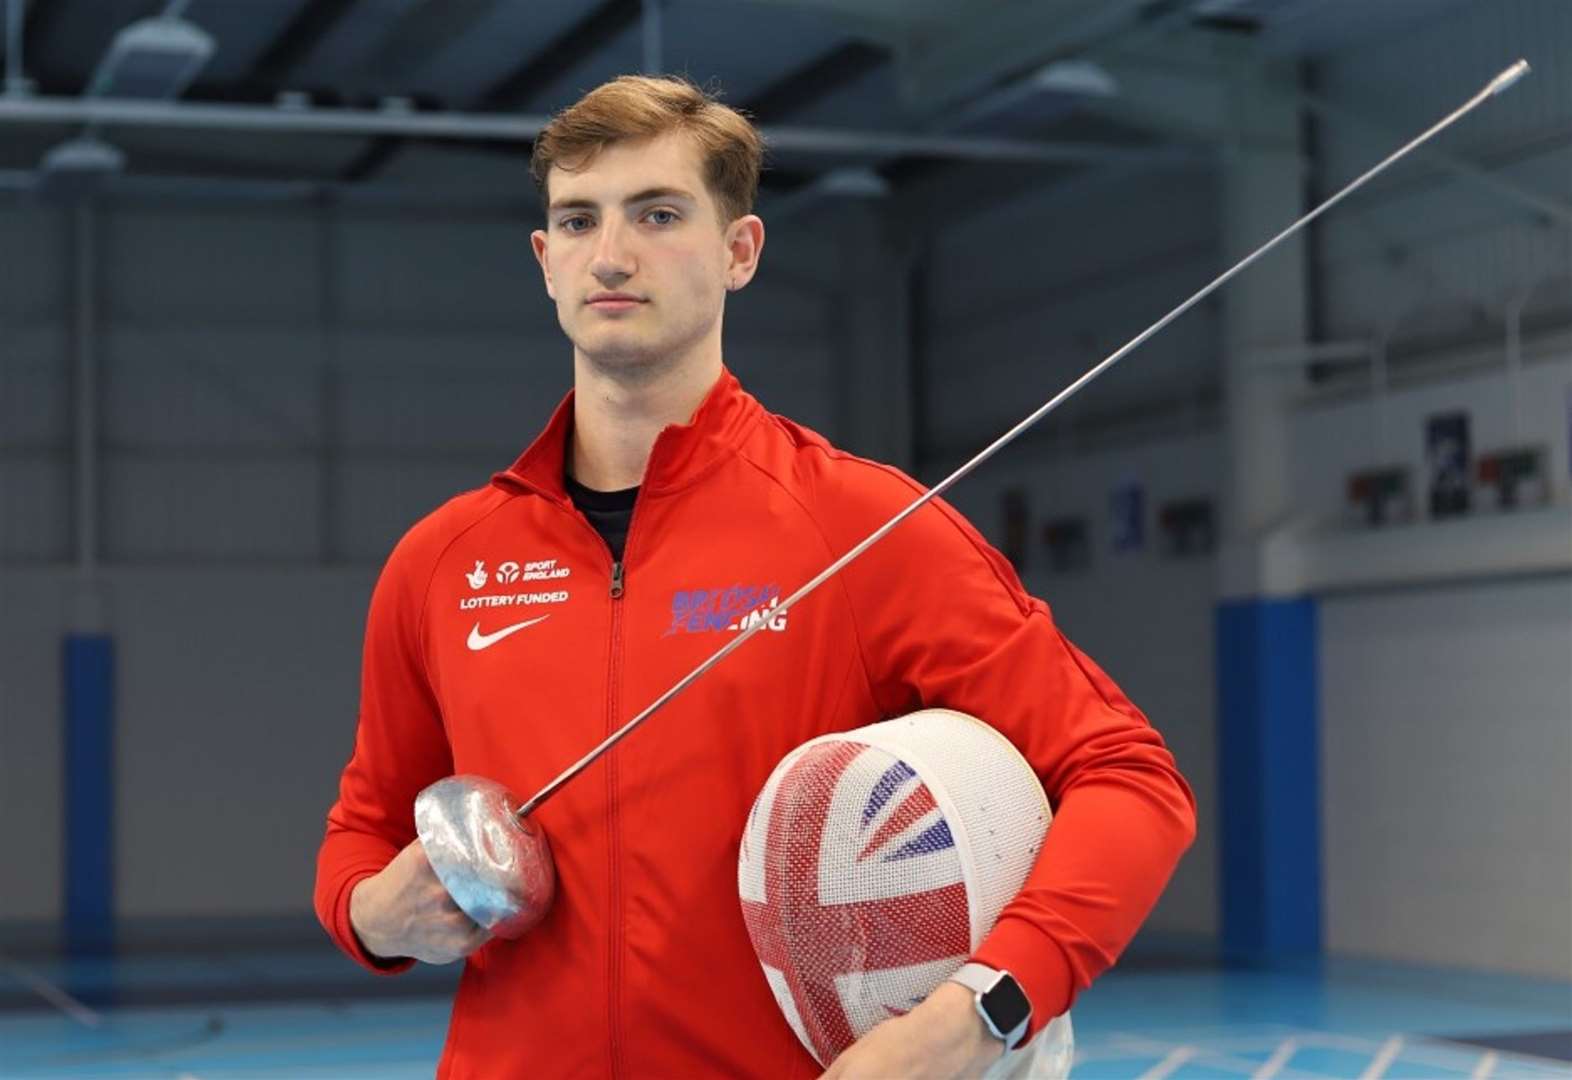 Canterbury fencing star William East pays tribute to coach ahead of World University Games1571 x 1080